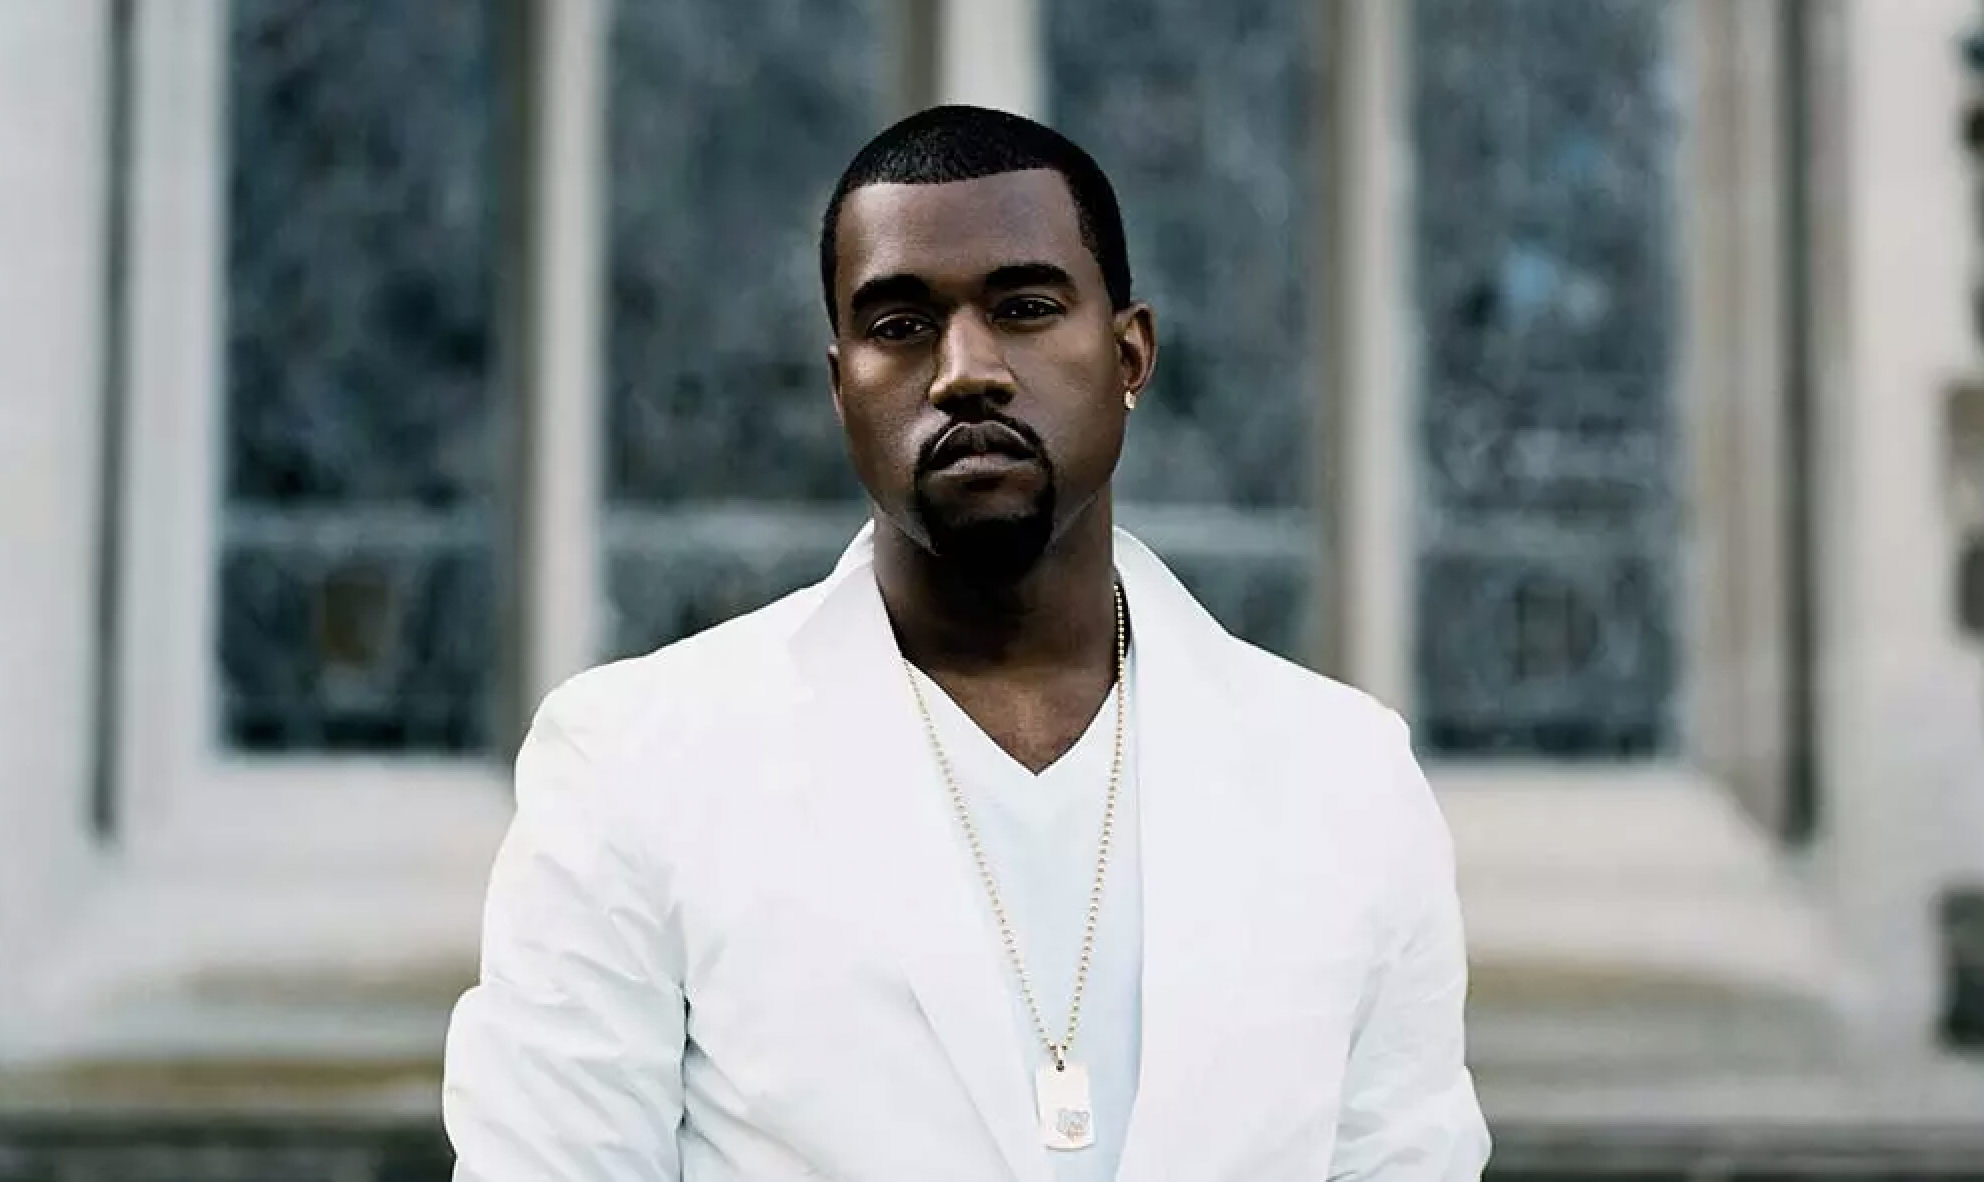 An image of Kanye West.